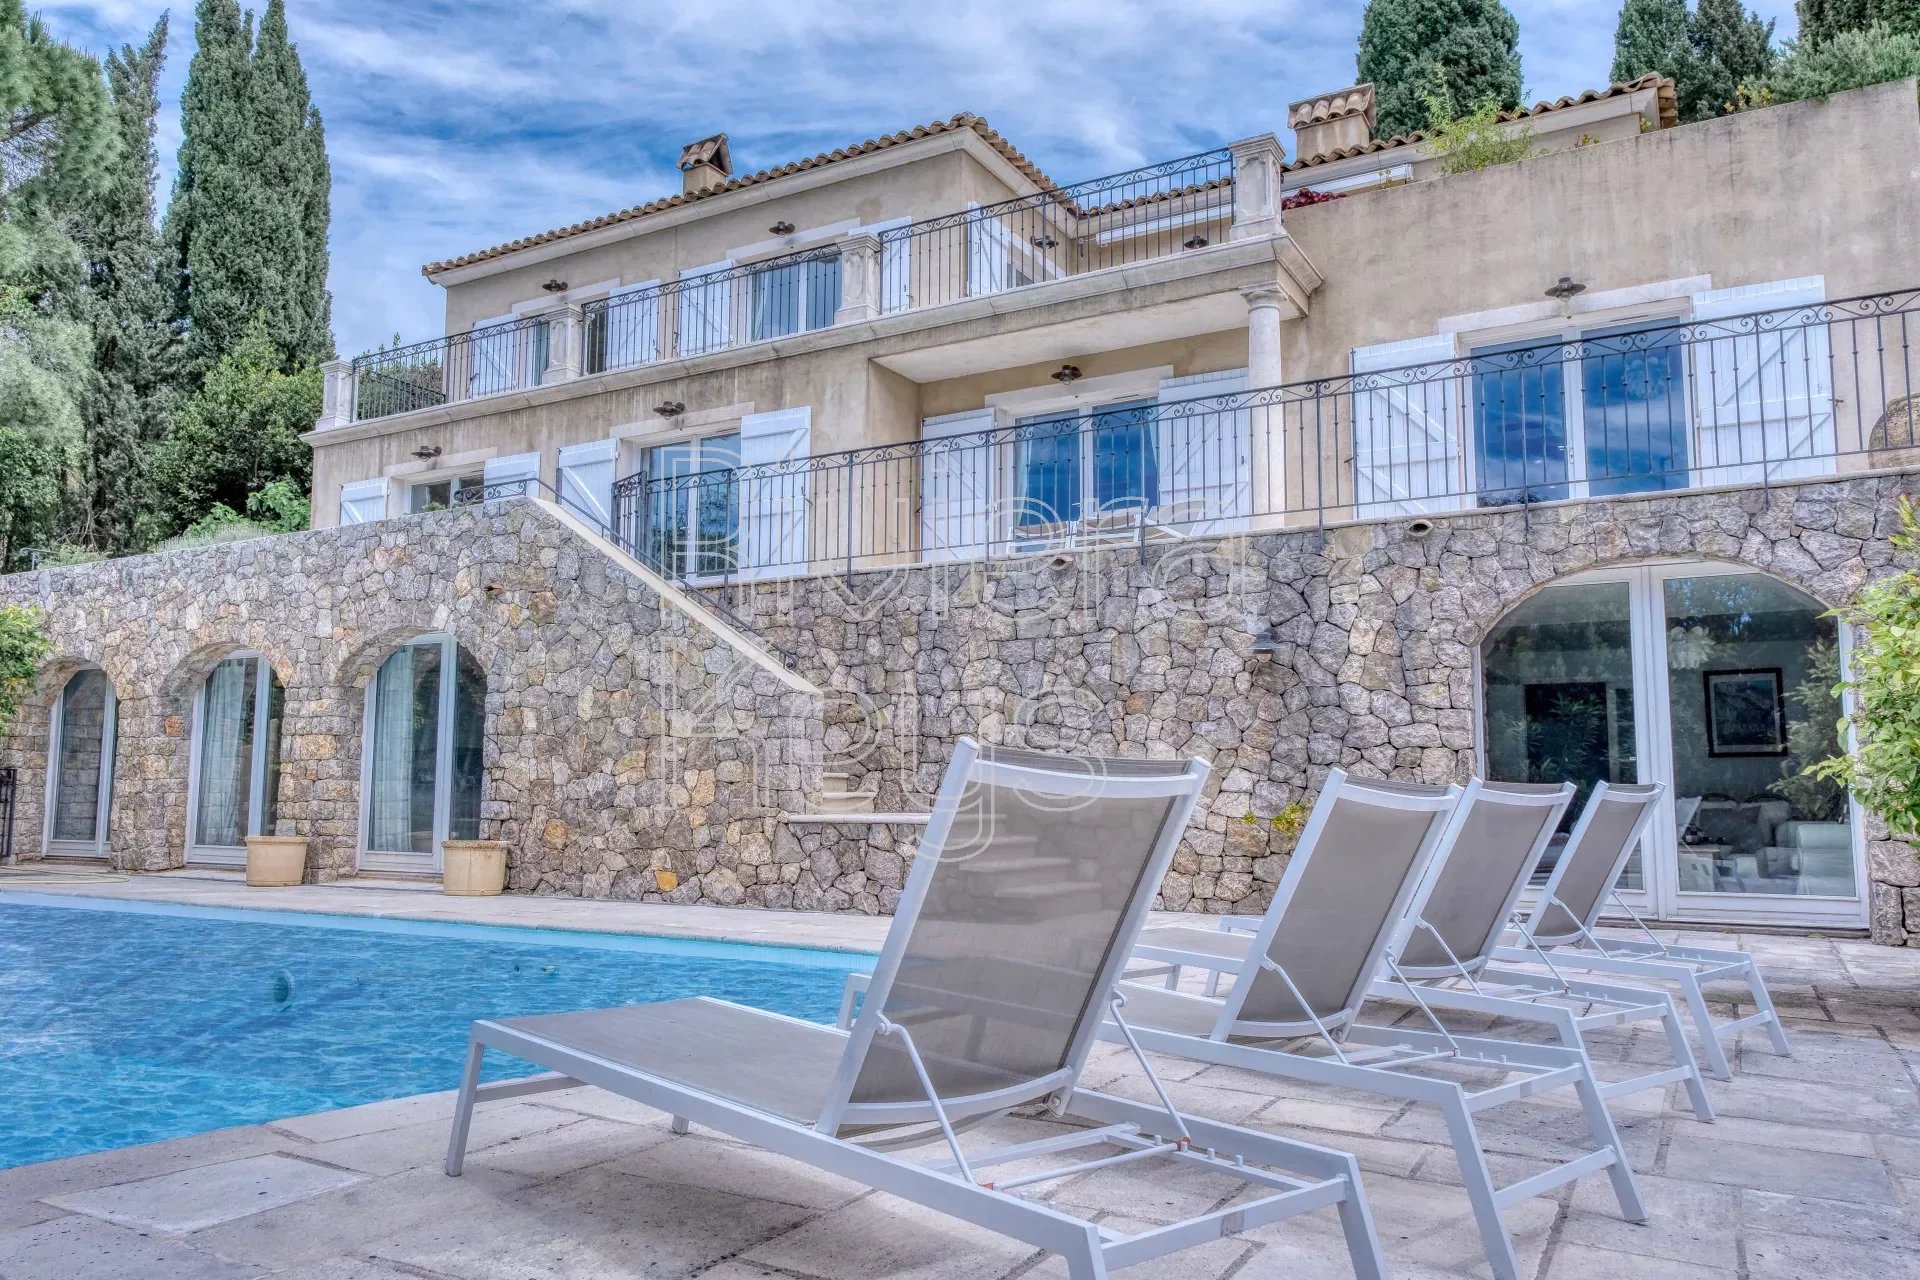 MOUGINS: 5 bedroom villa, 297 m² in perfect condition with swimming pool and view of the hills